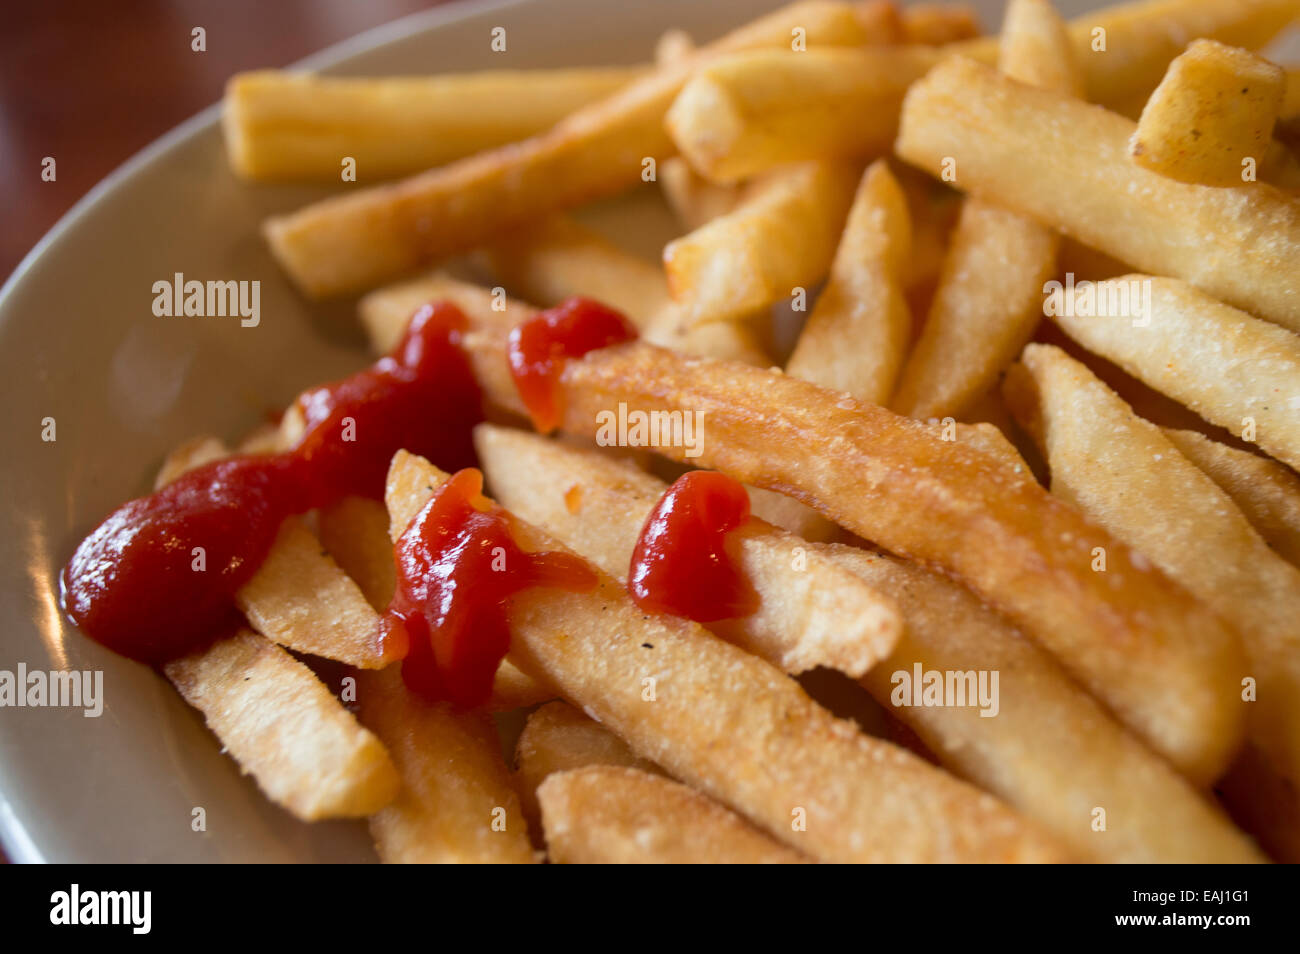 French fries with ketchup. Stock Photo